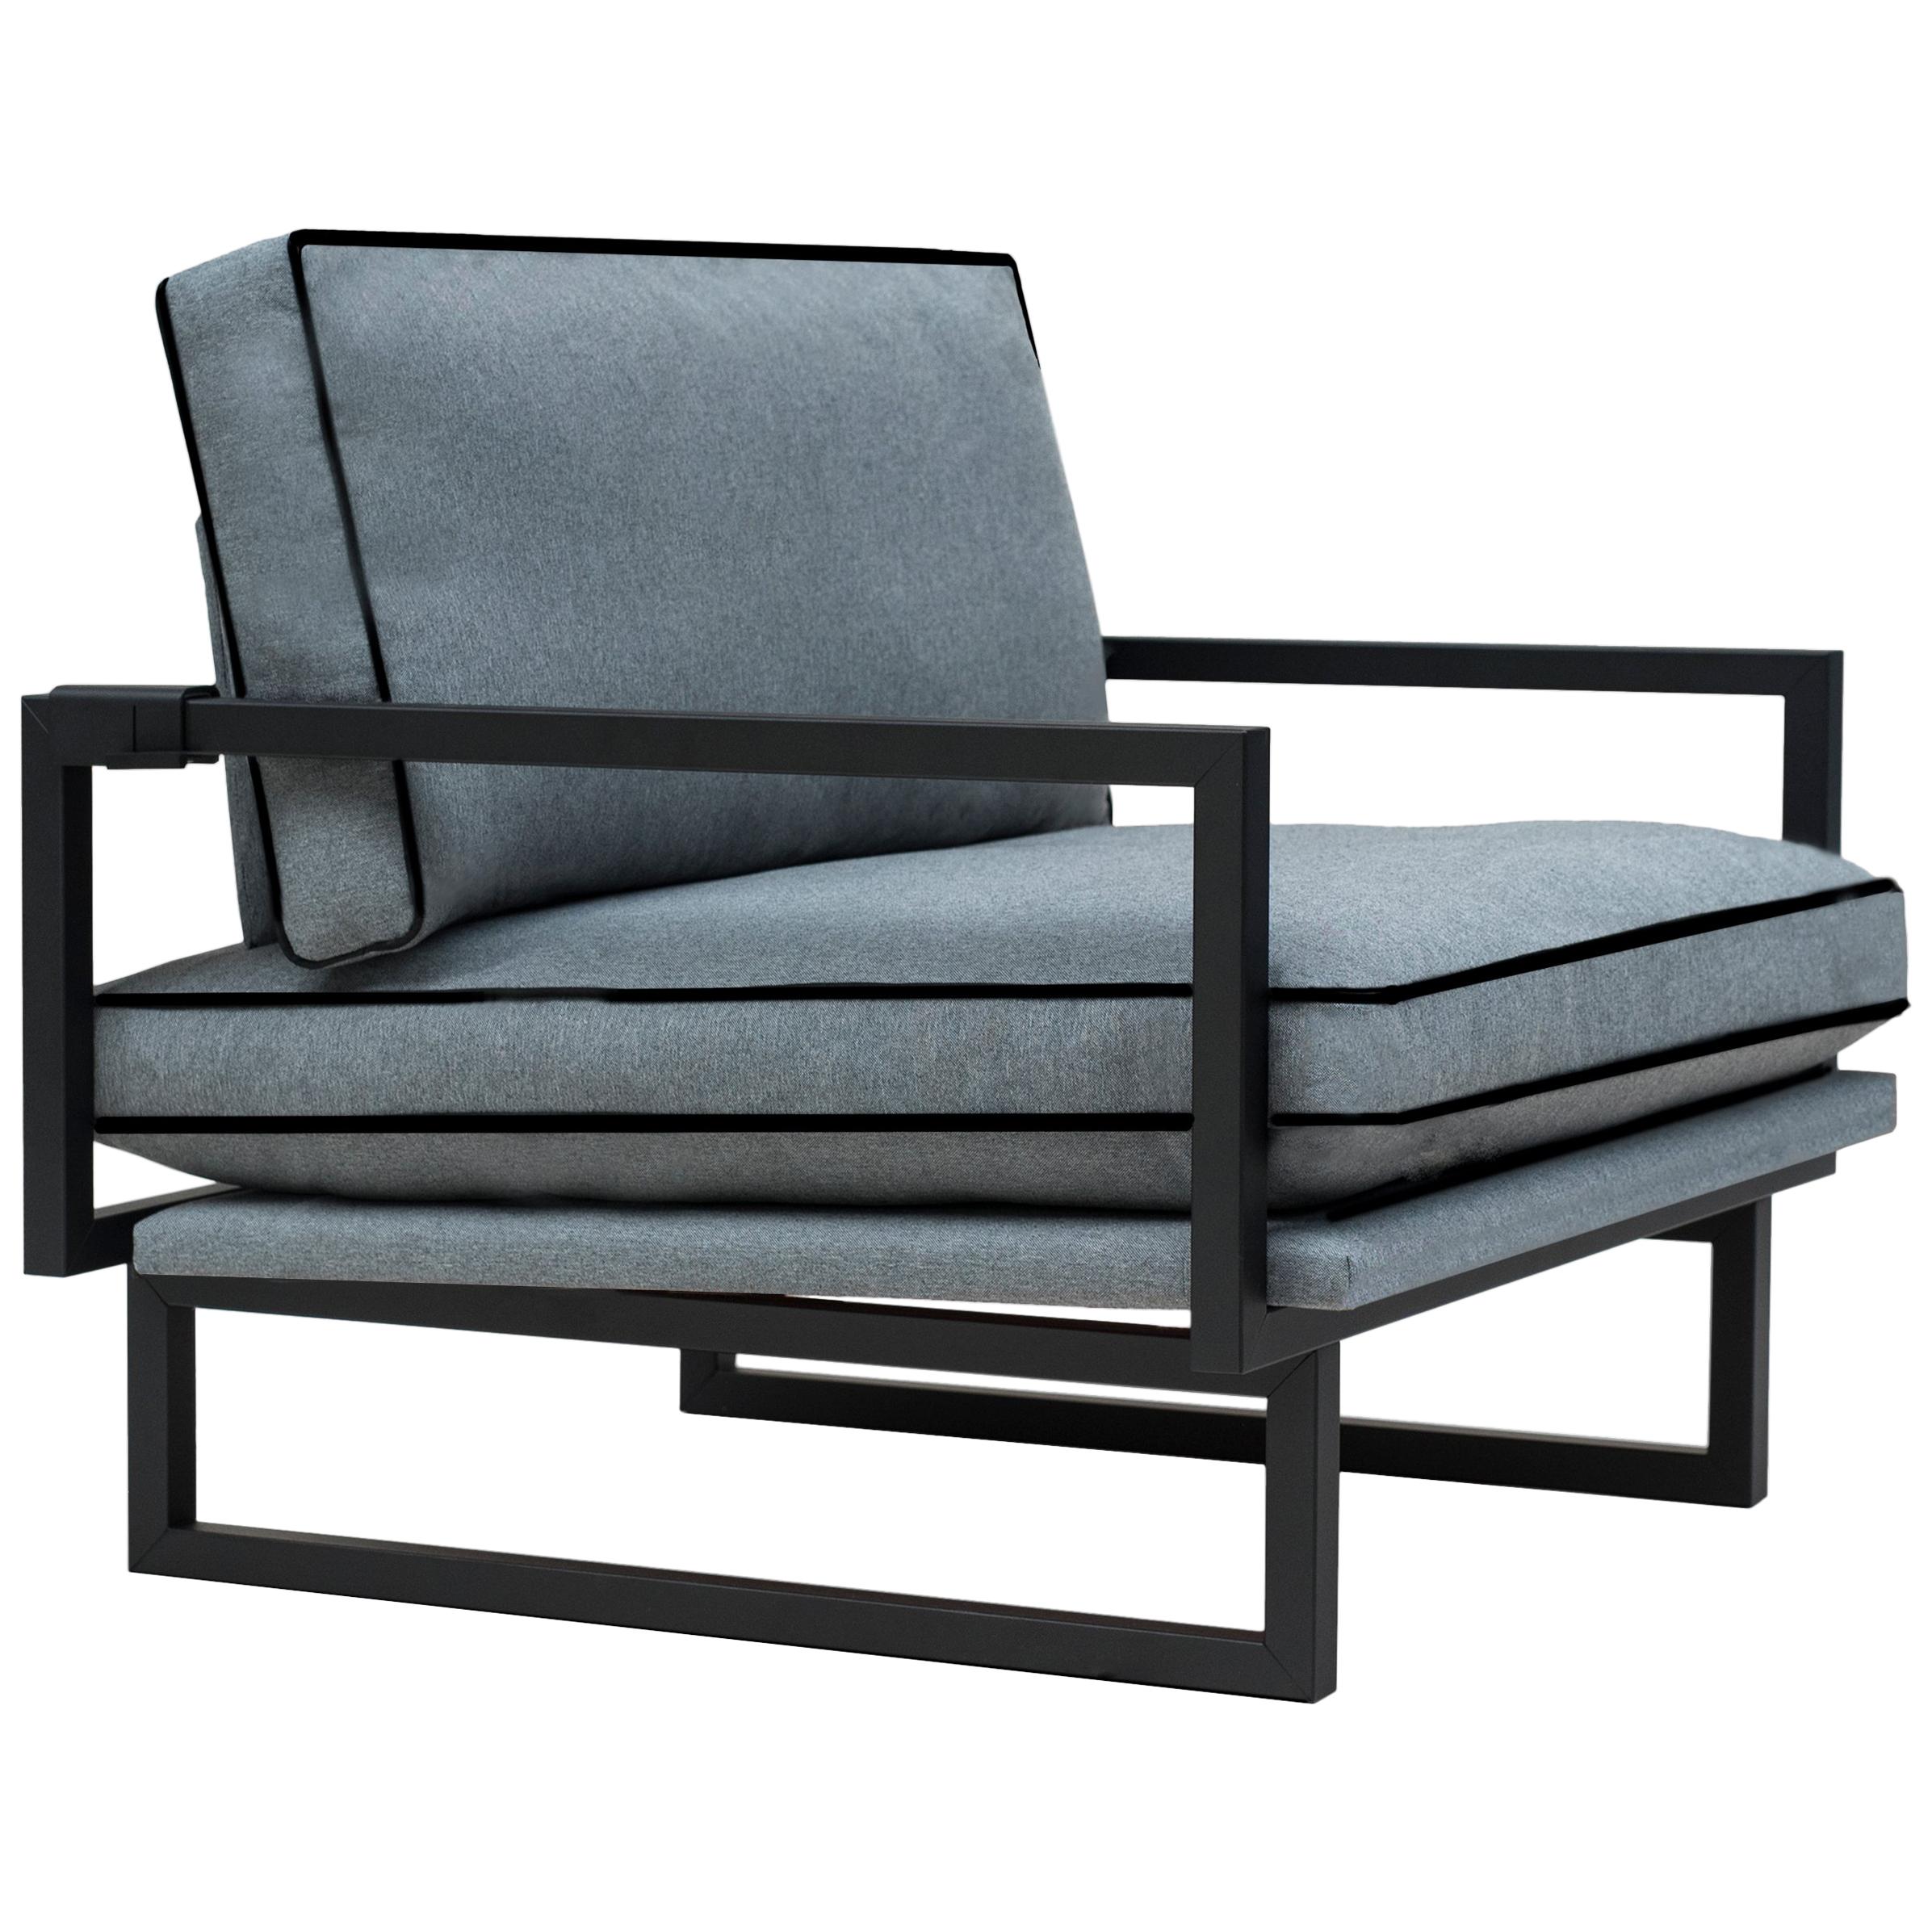 GHYCZY Armchair Brad GP01 Frame Charcoal, Ristretto, Black Details For Sale